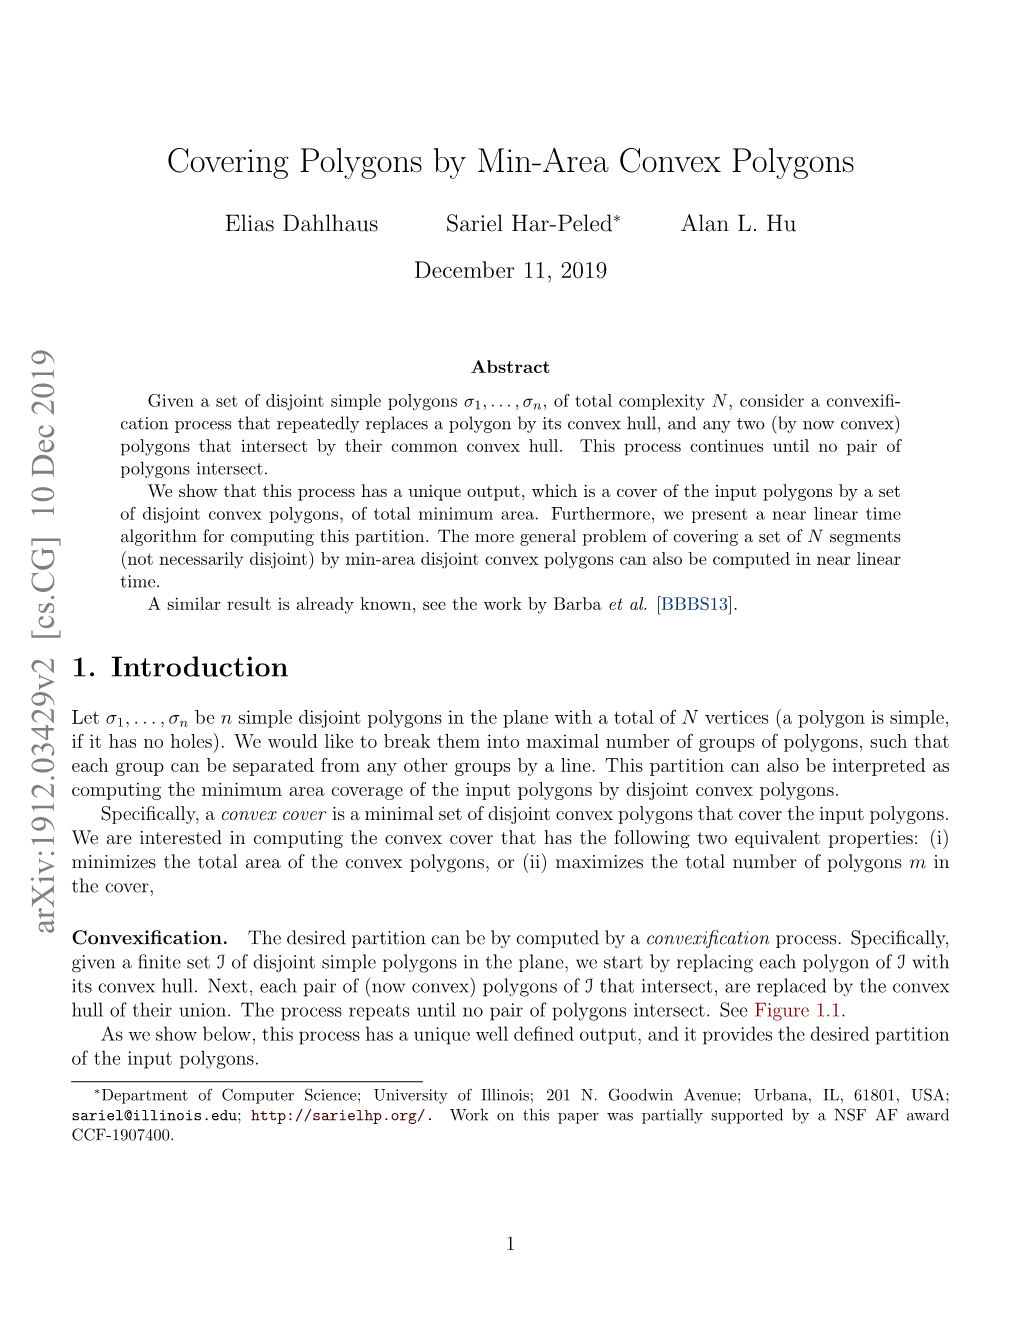 Covering Polygons by Min-Area Convex Polygons Arxiv